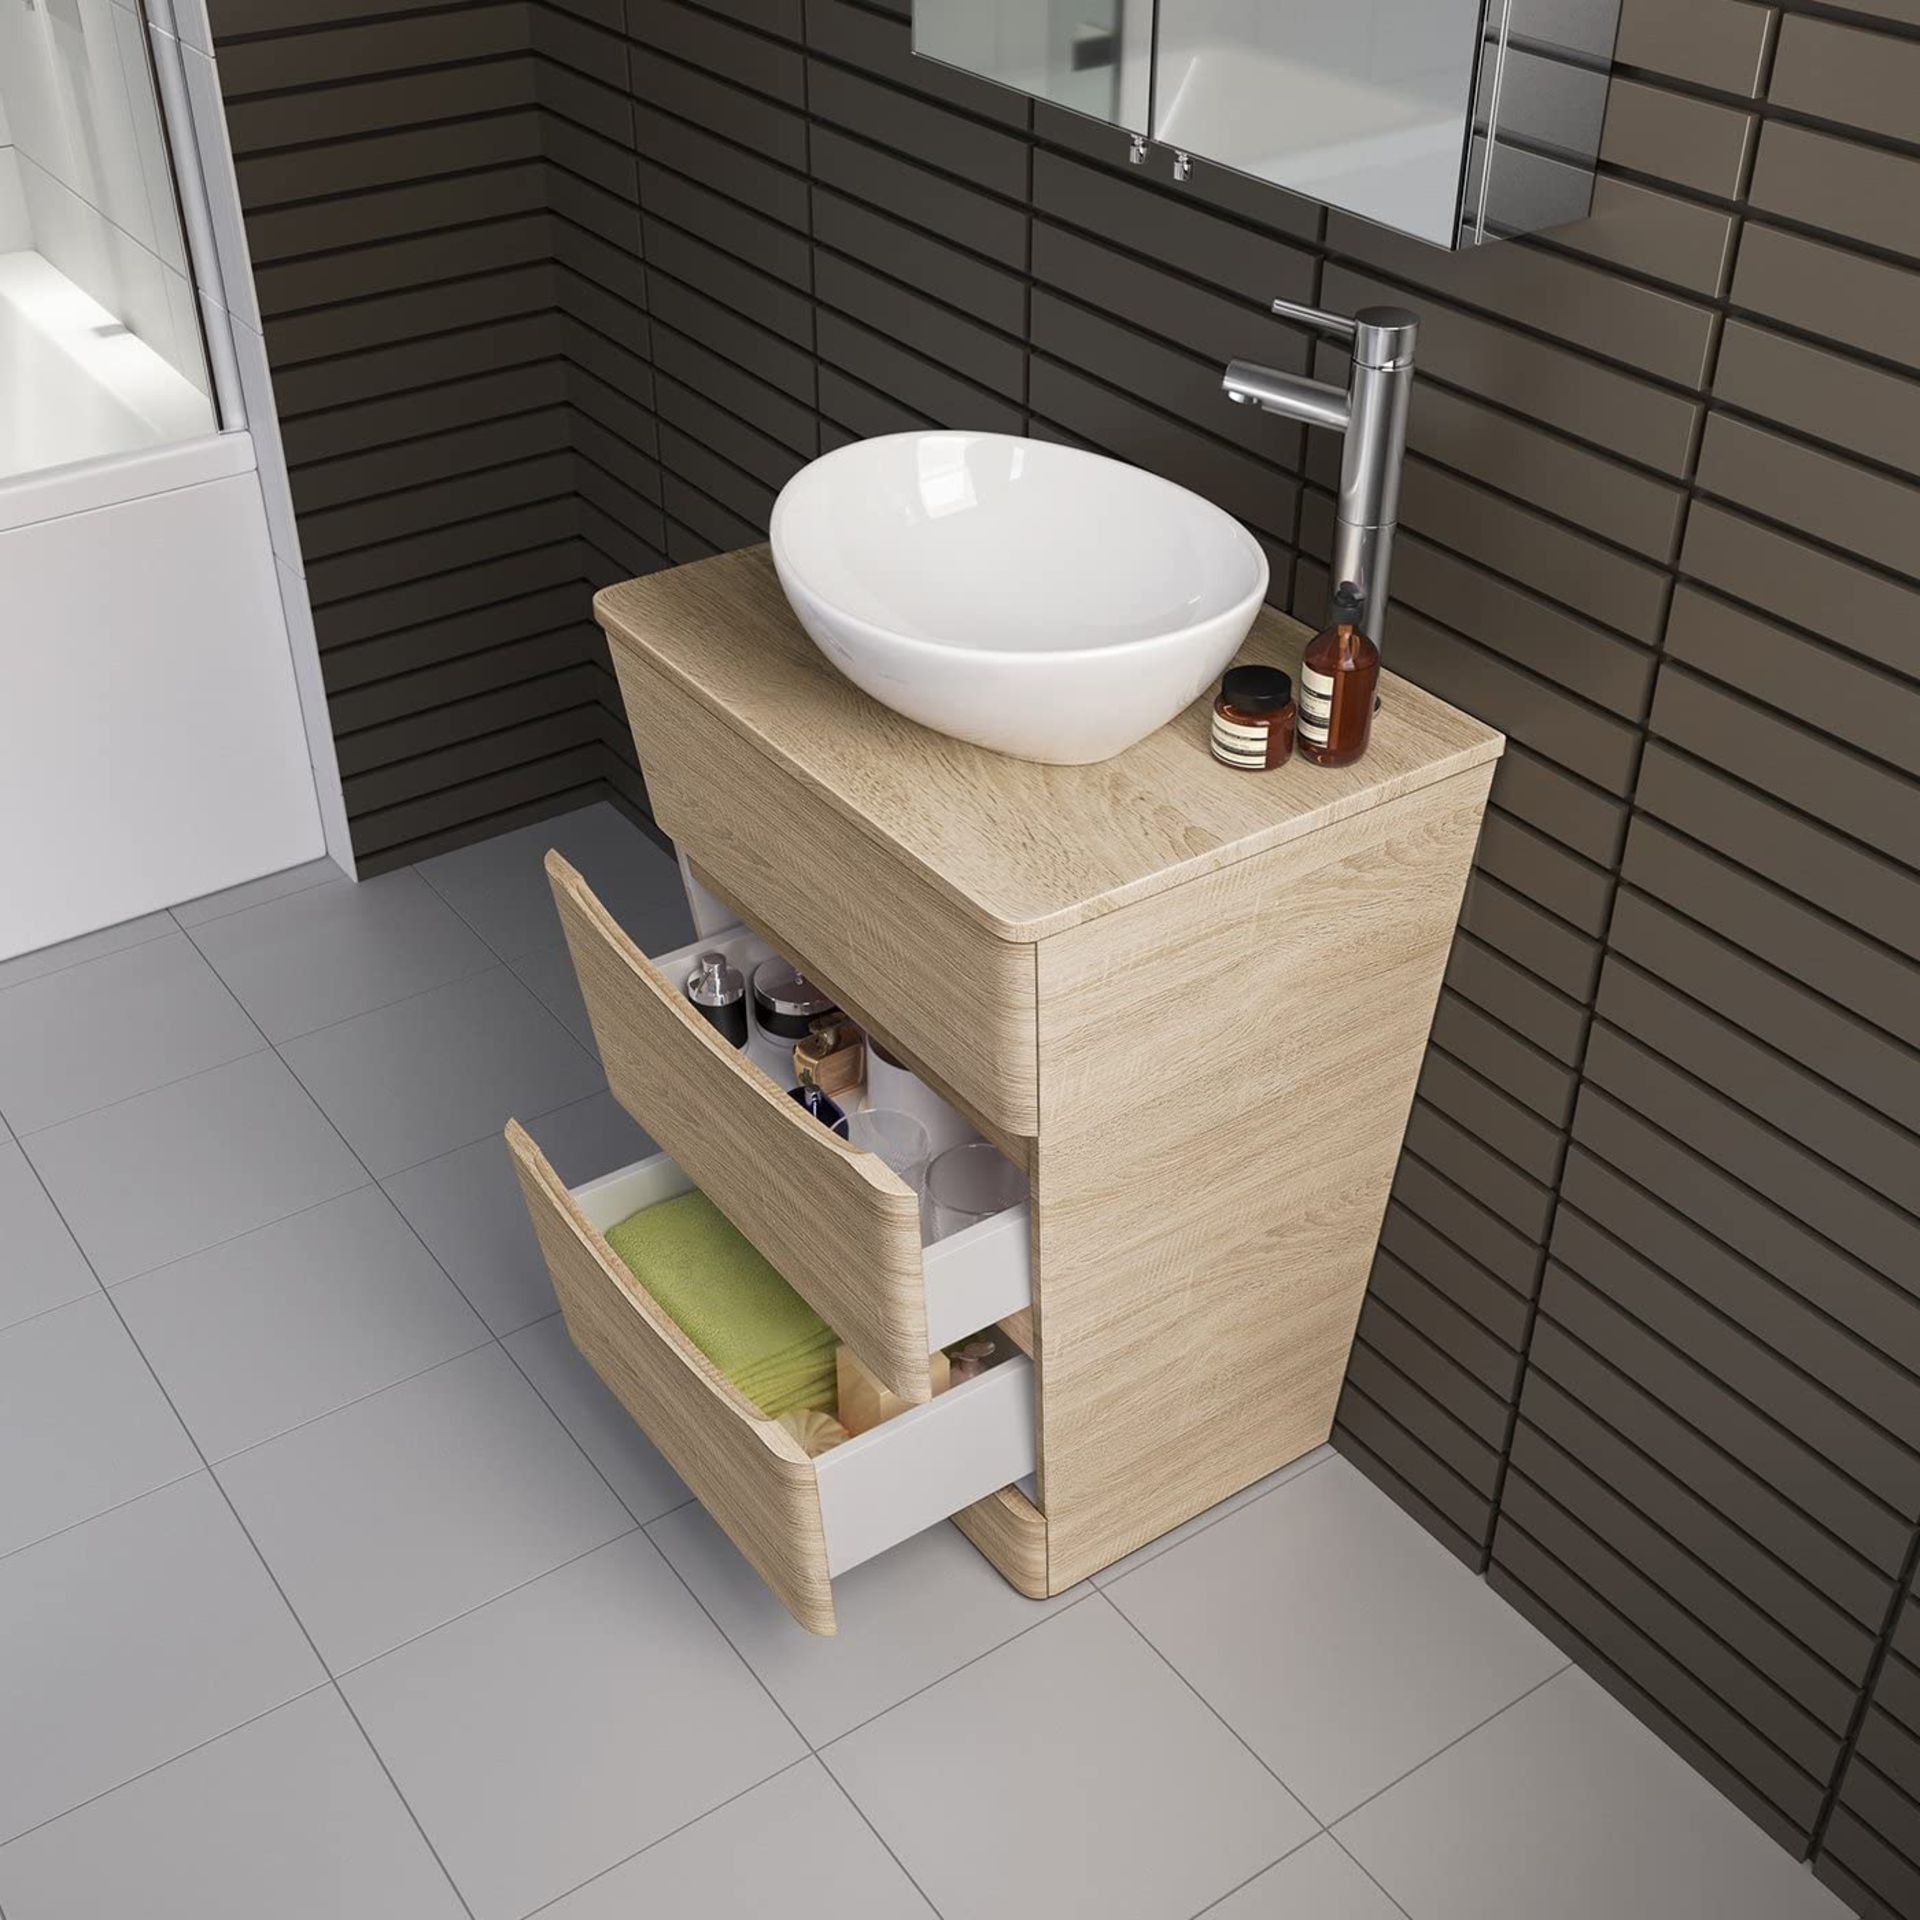 NEW & BOXED 600mm Austin II Light Oak Effect Countertop Unit and Camila Basin - Wall Hung. RRP ... - Image 3 of 3